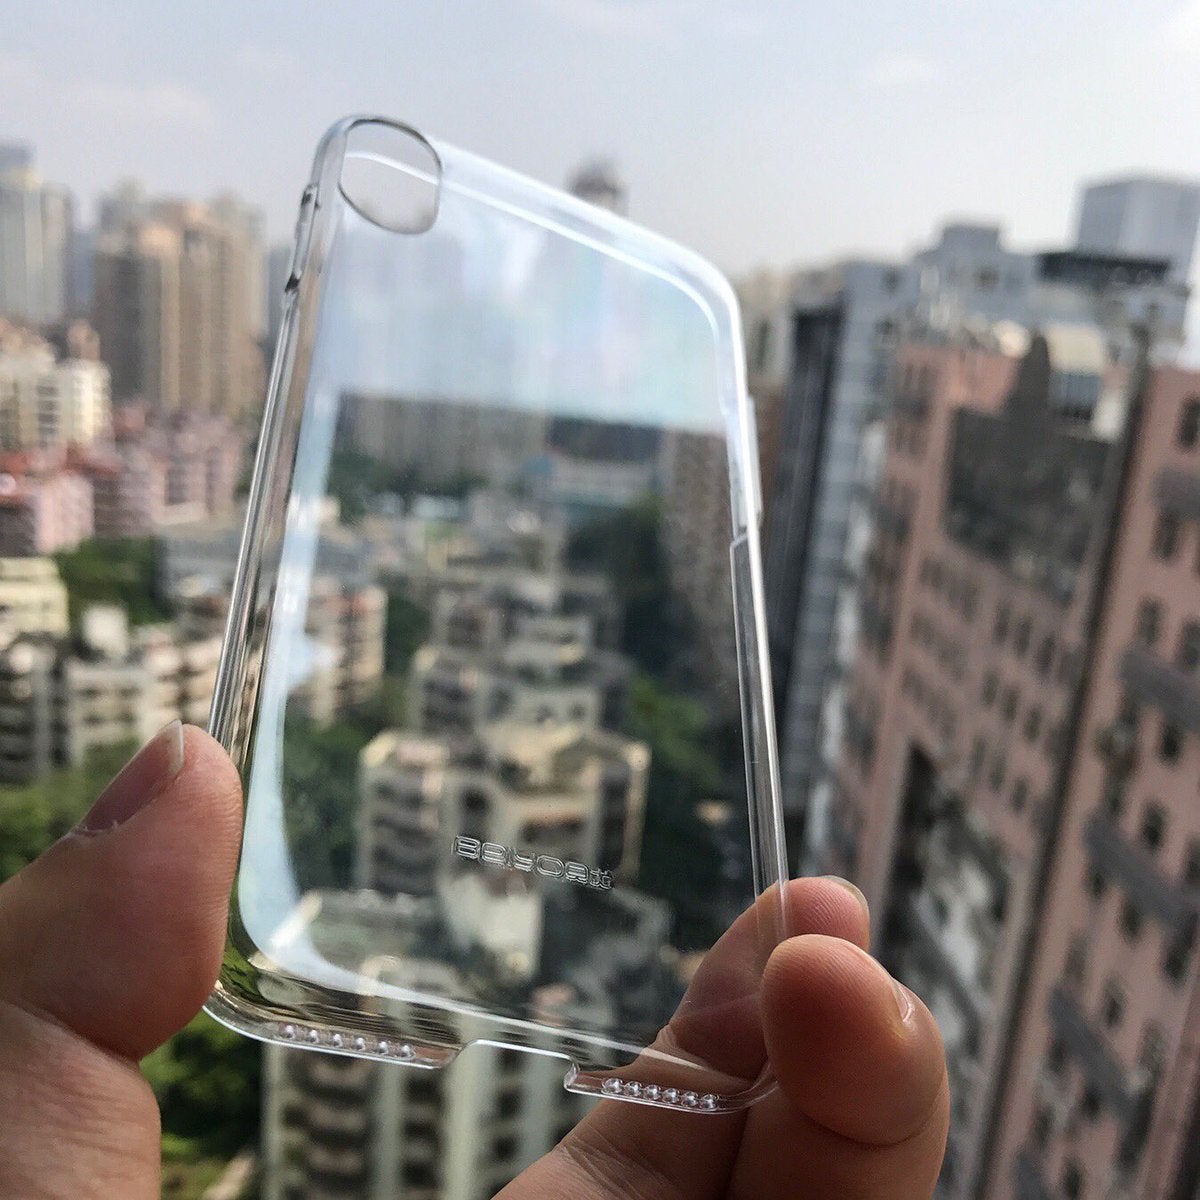 Alleged protective case for the iPhone 8 pops up in photo, reaffirms some rumors